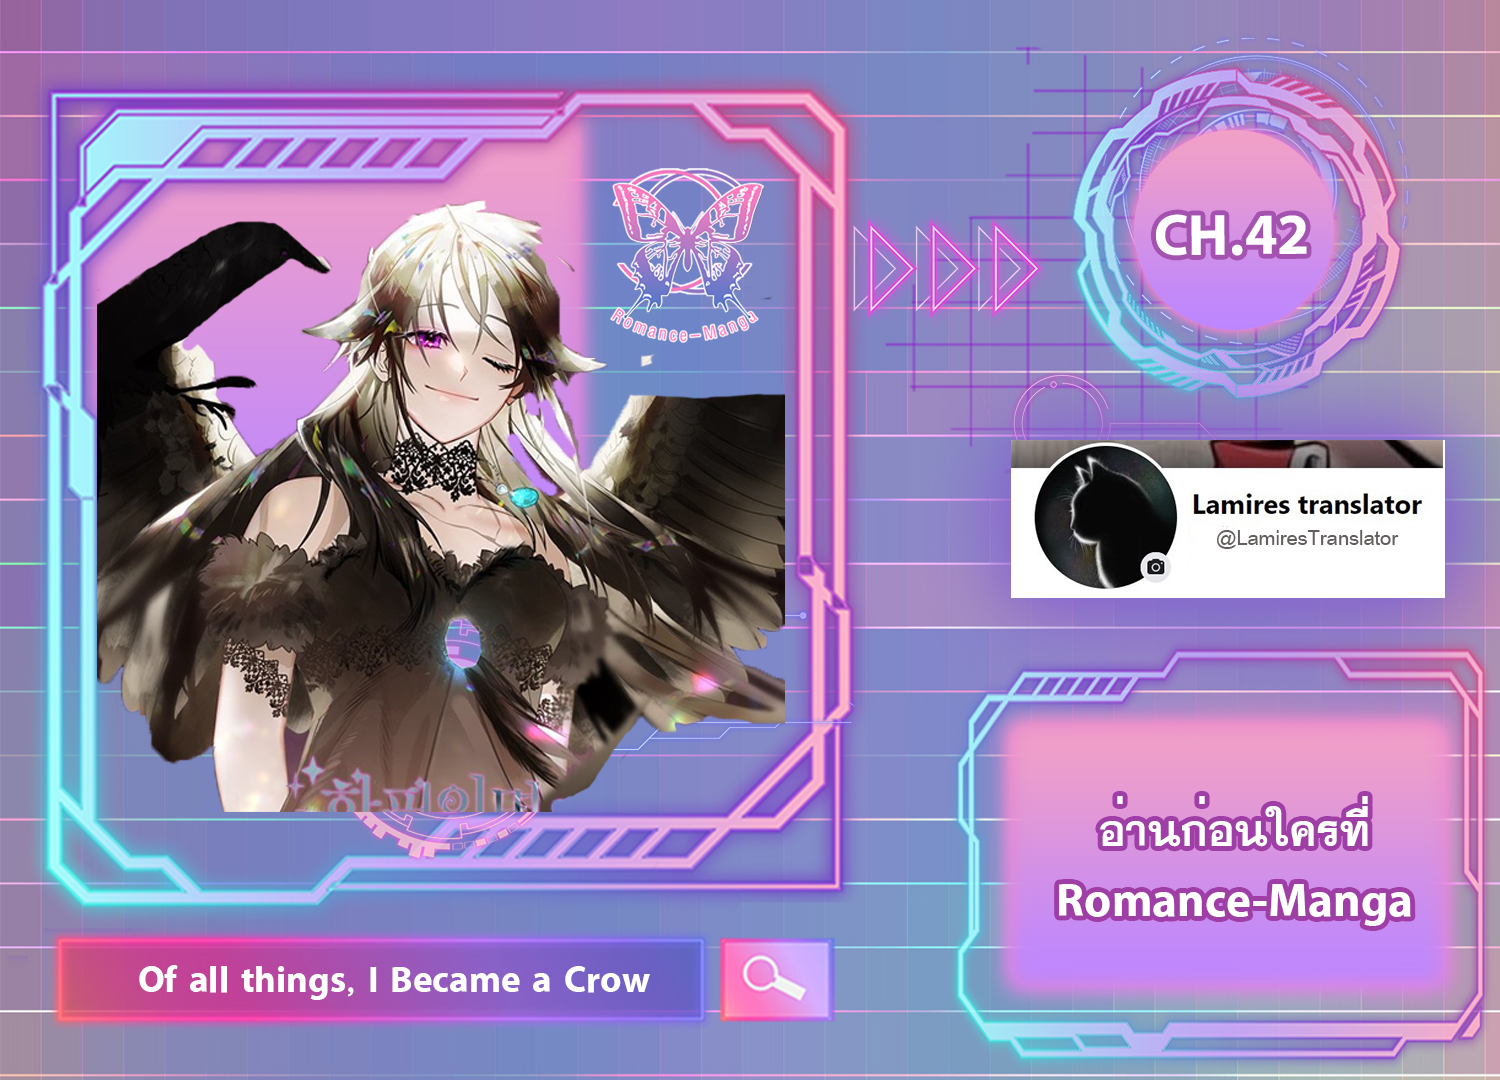 Of all things, I Became a Crow42